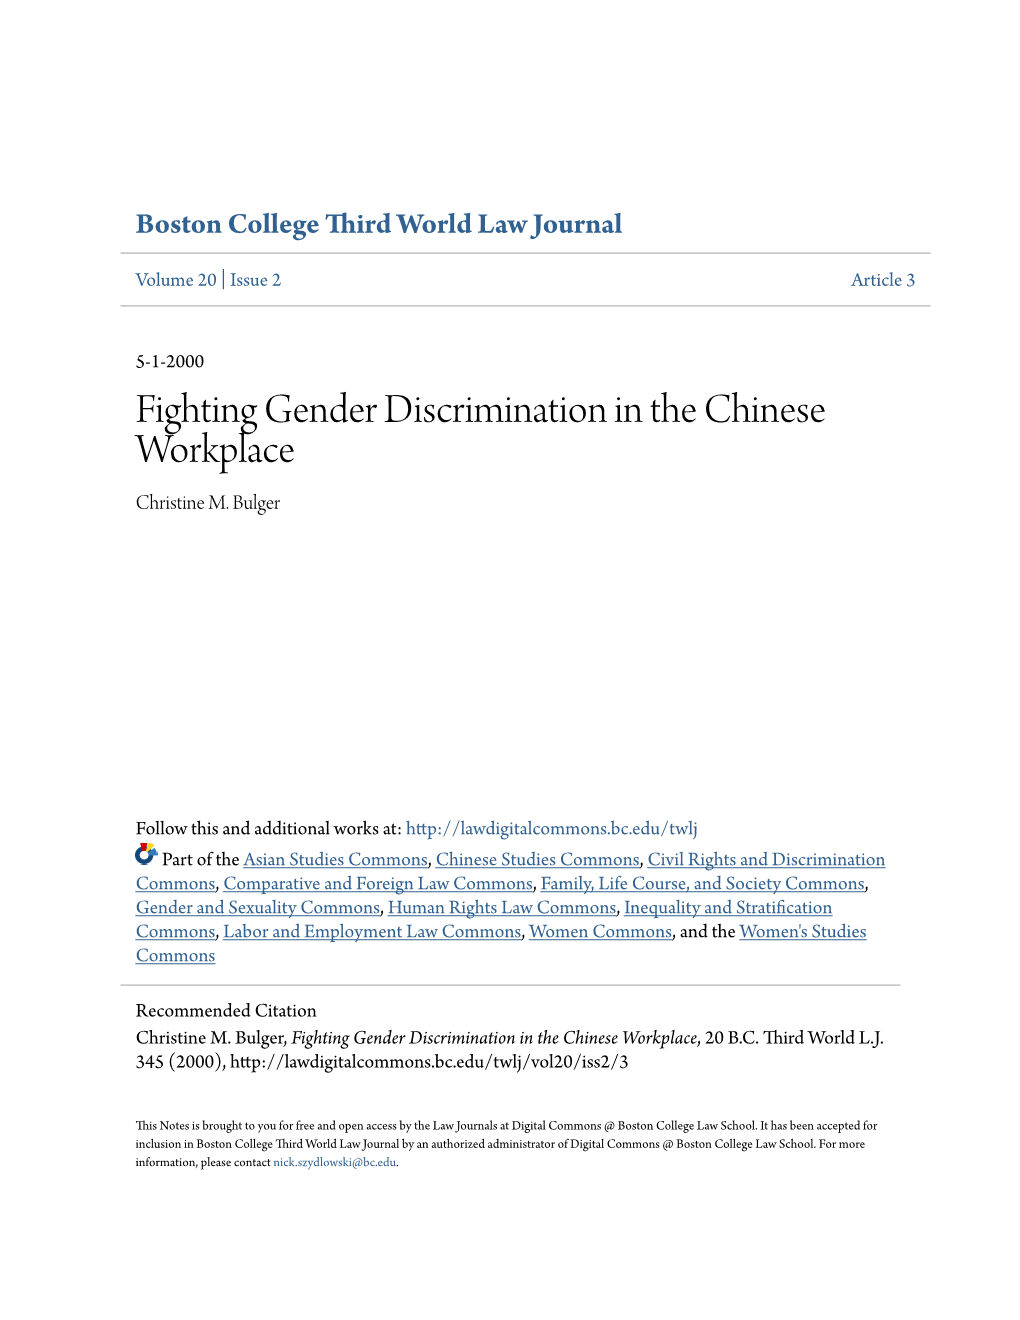 Fighting Gender Discrimination in the Chinese Workplace Christine M